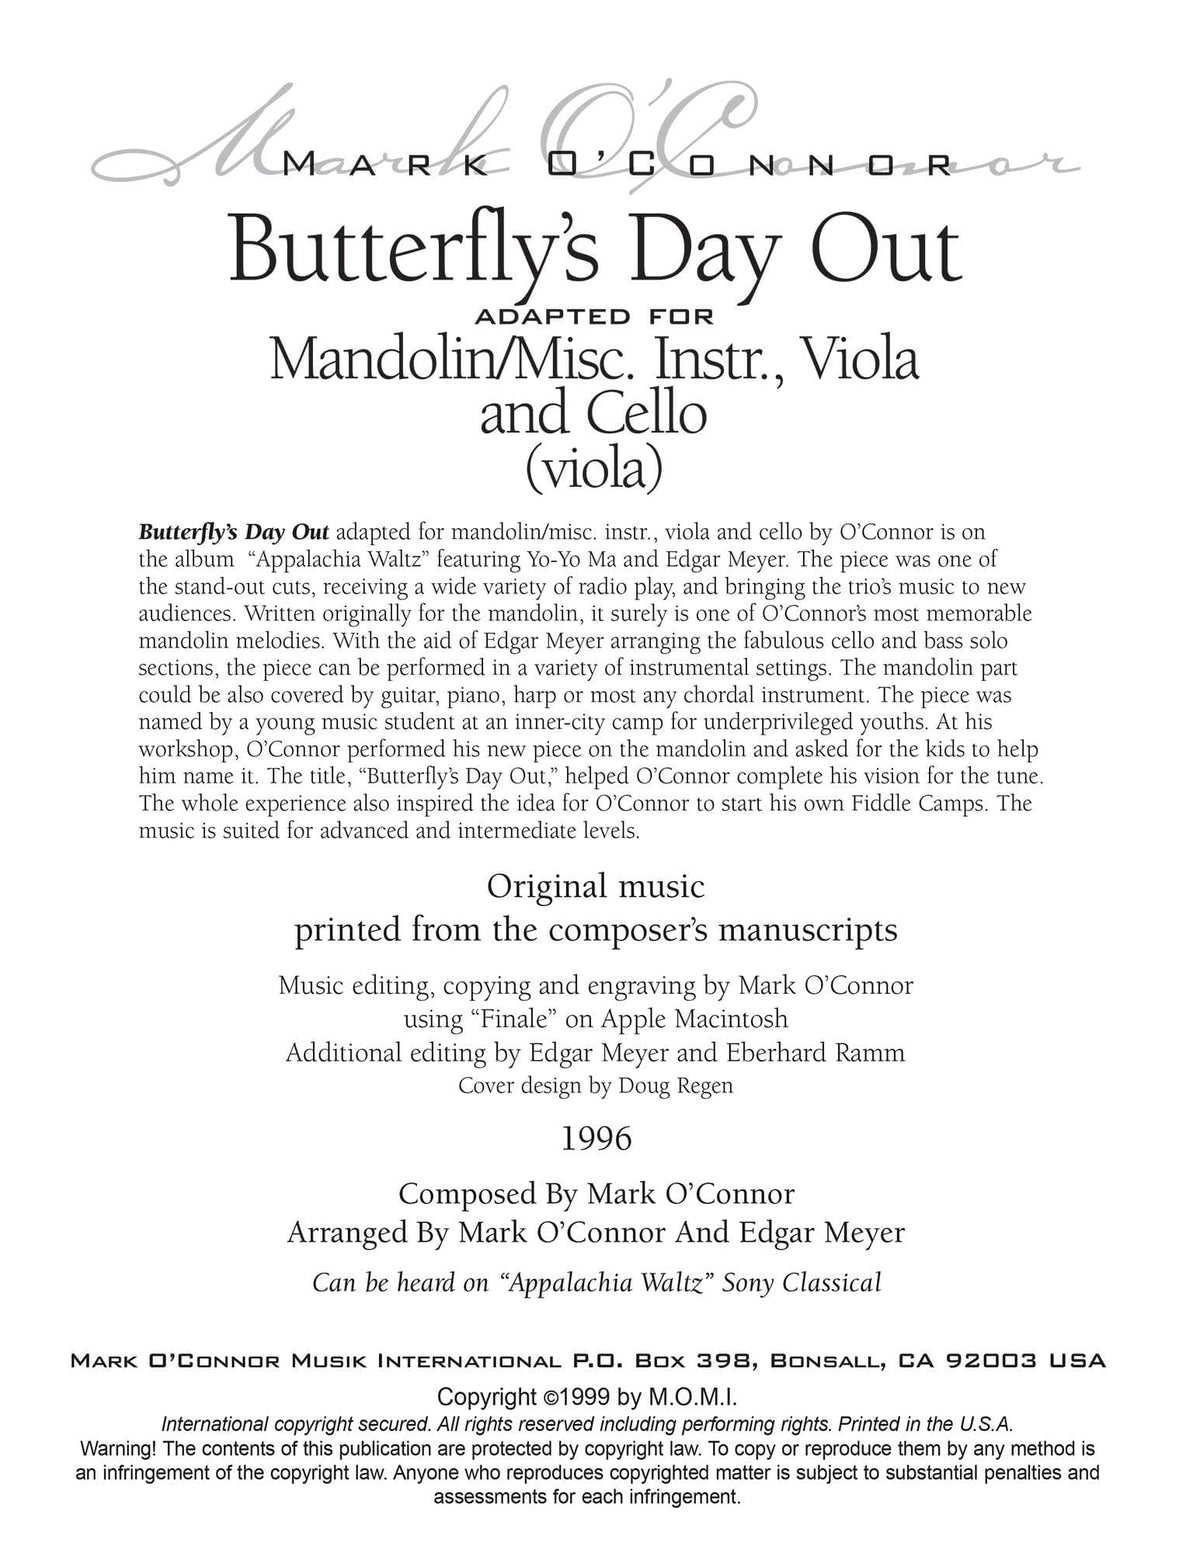 O'Connor, Mark - Butterfly's Day Out for Mandolin, Viola, Cello - Viola - Digital Download